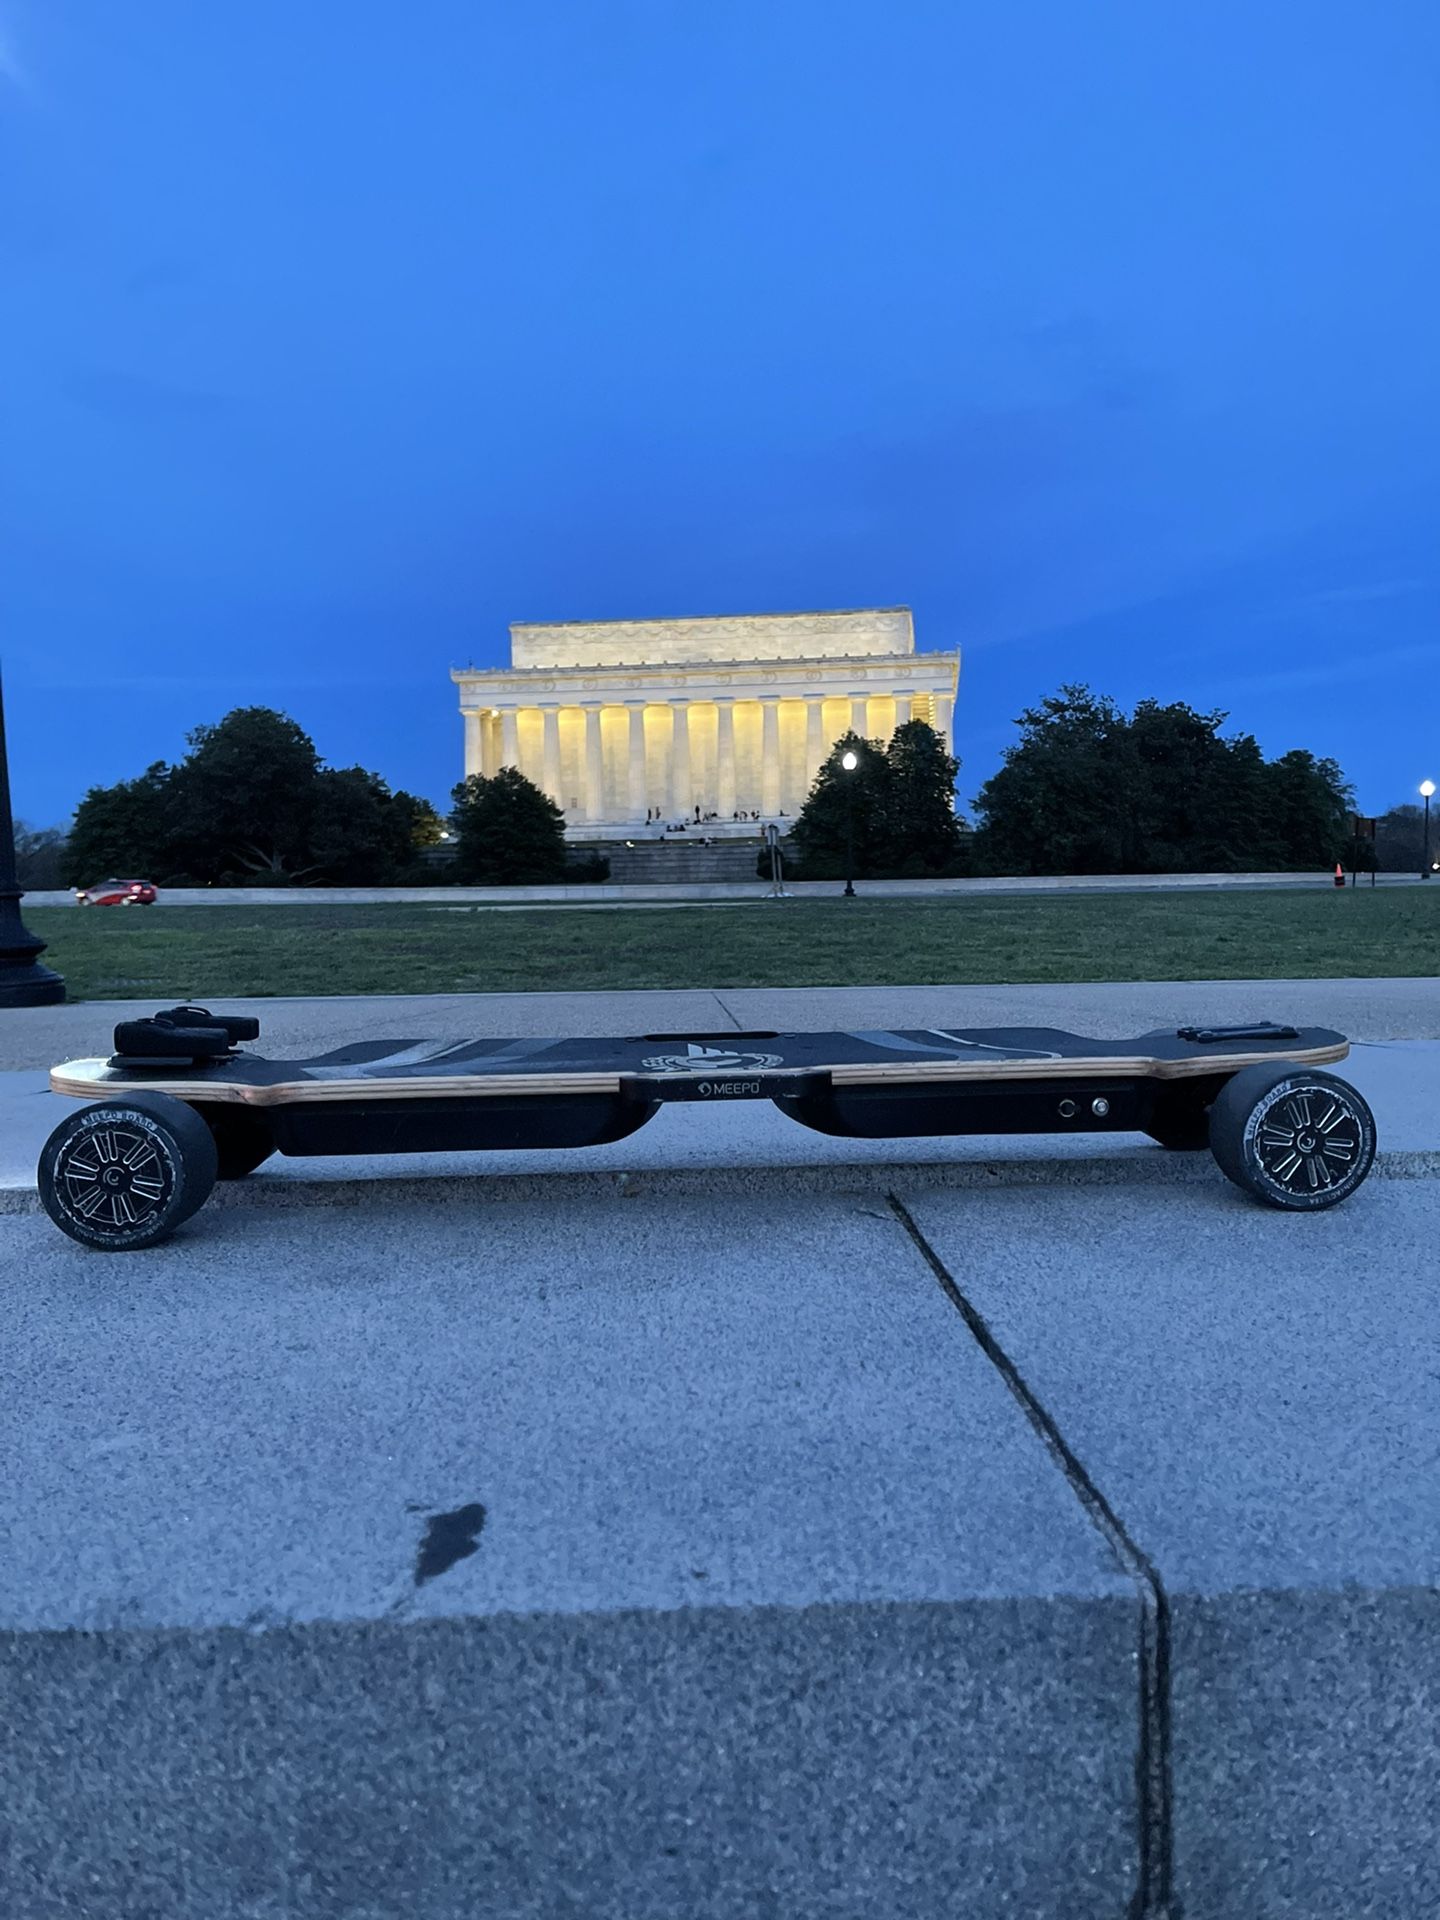 Meepo AWD Pro Electric Skateboard 15 Miles Range with 34mph Top Speed